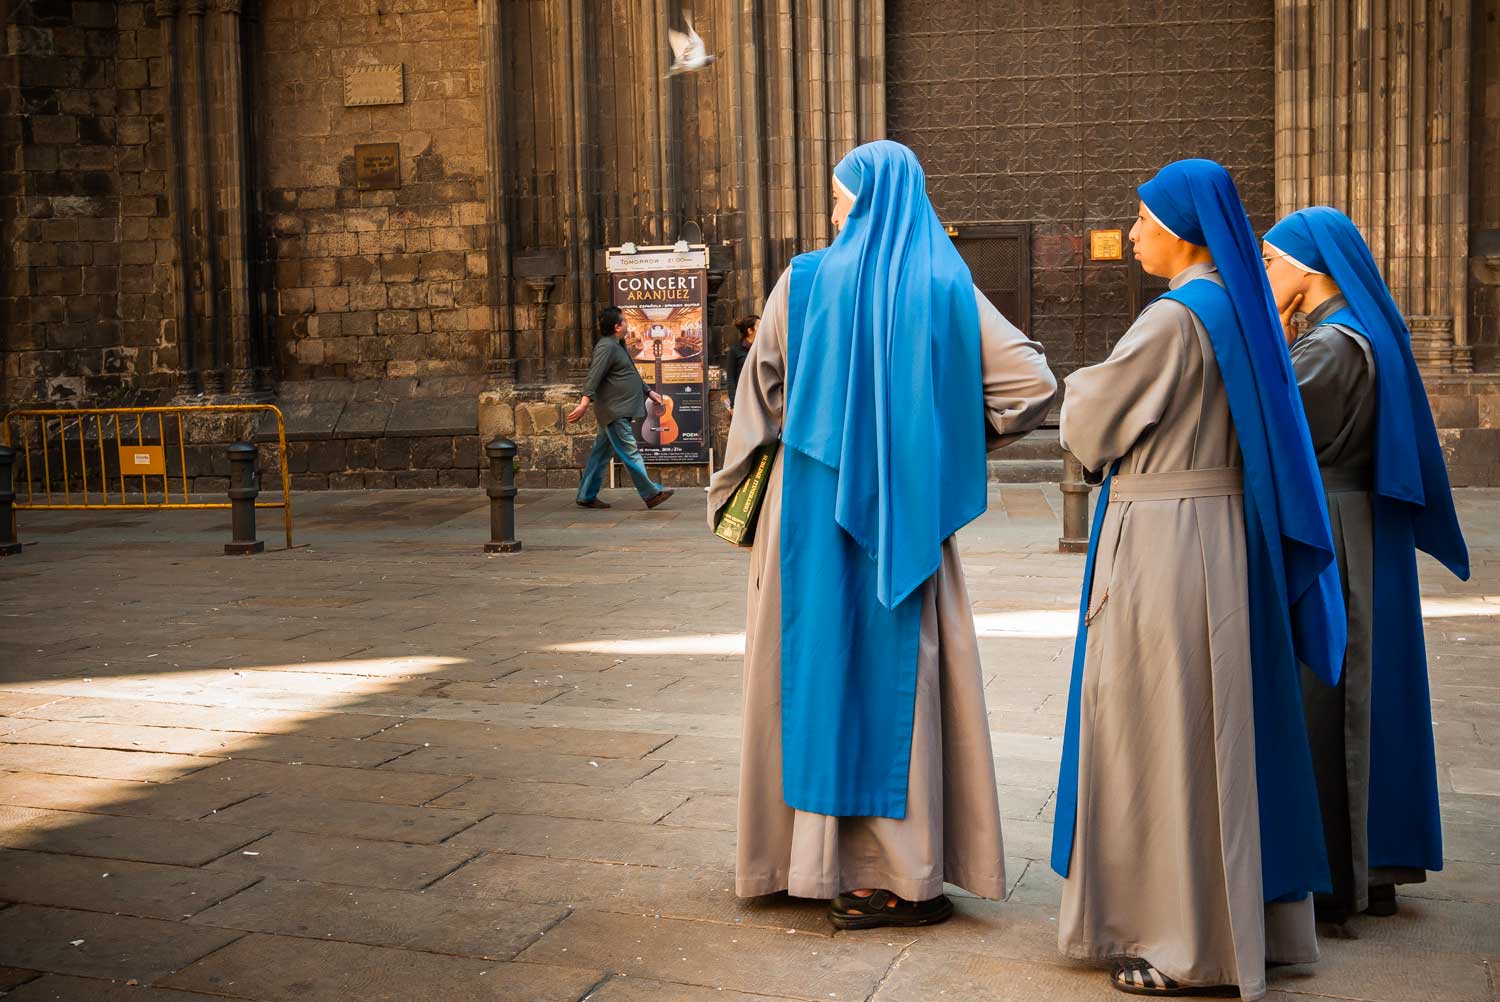 Nuns work their magic at the Barcelona Cathedral